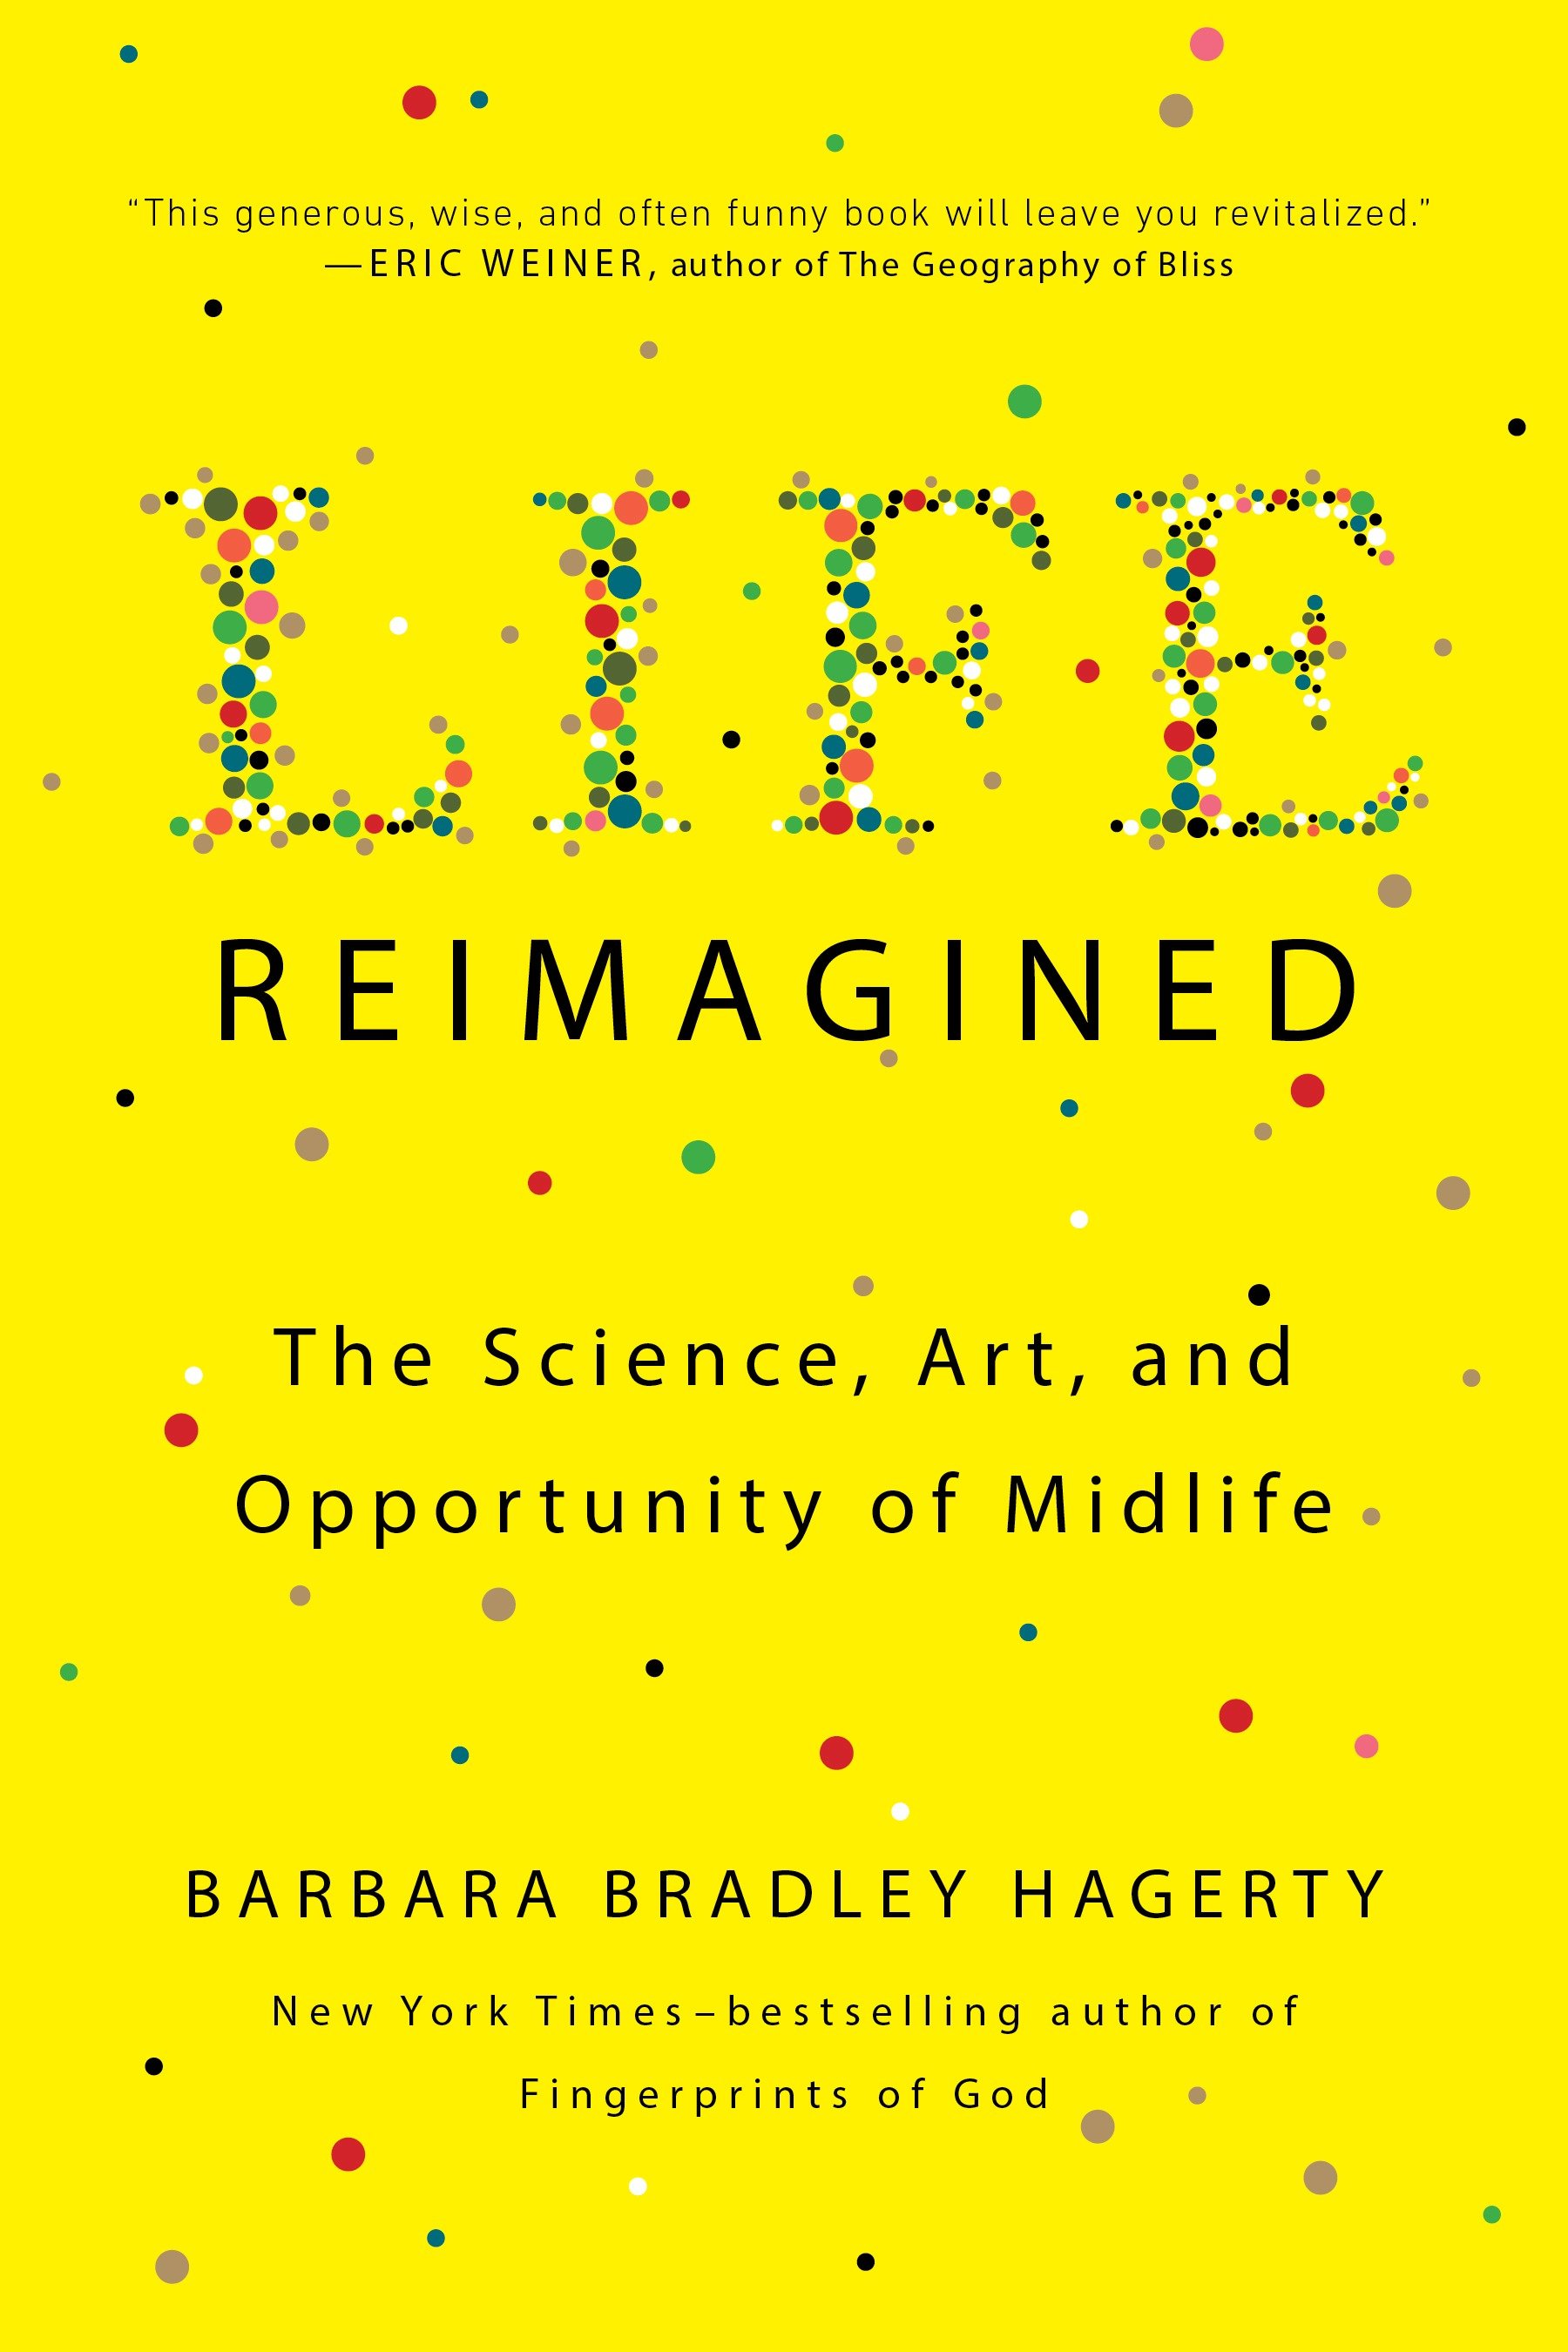 Life reimagined The Science, Art, and Opportunity of Midlife cover image